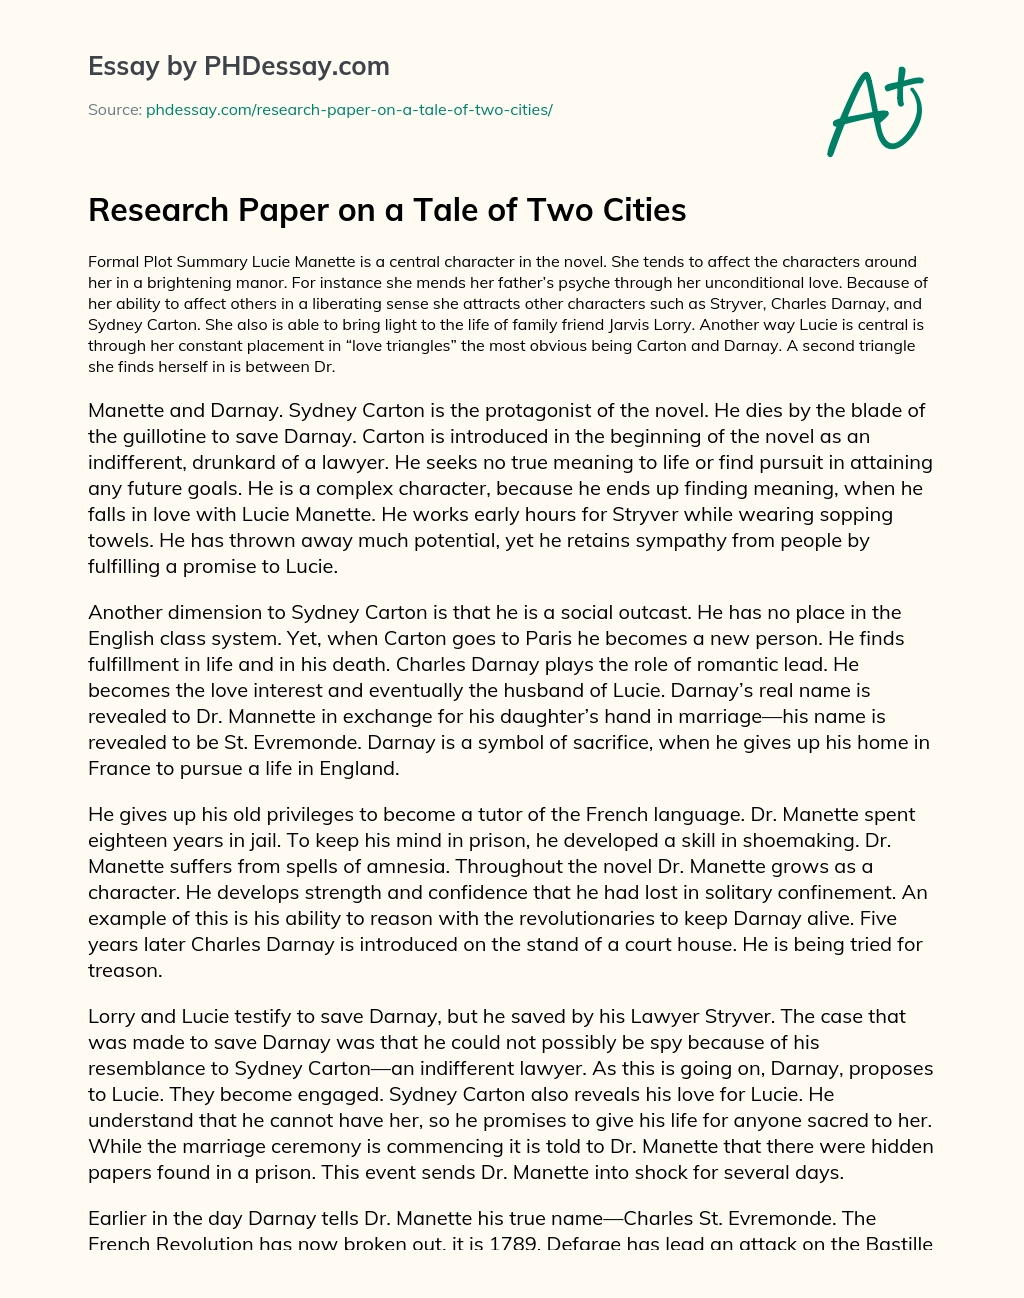 Research Paper on a Tale of Two Cities essay